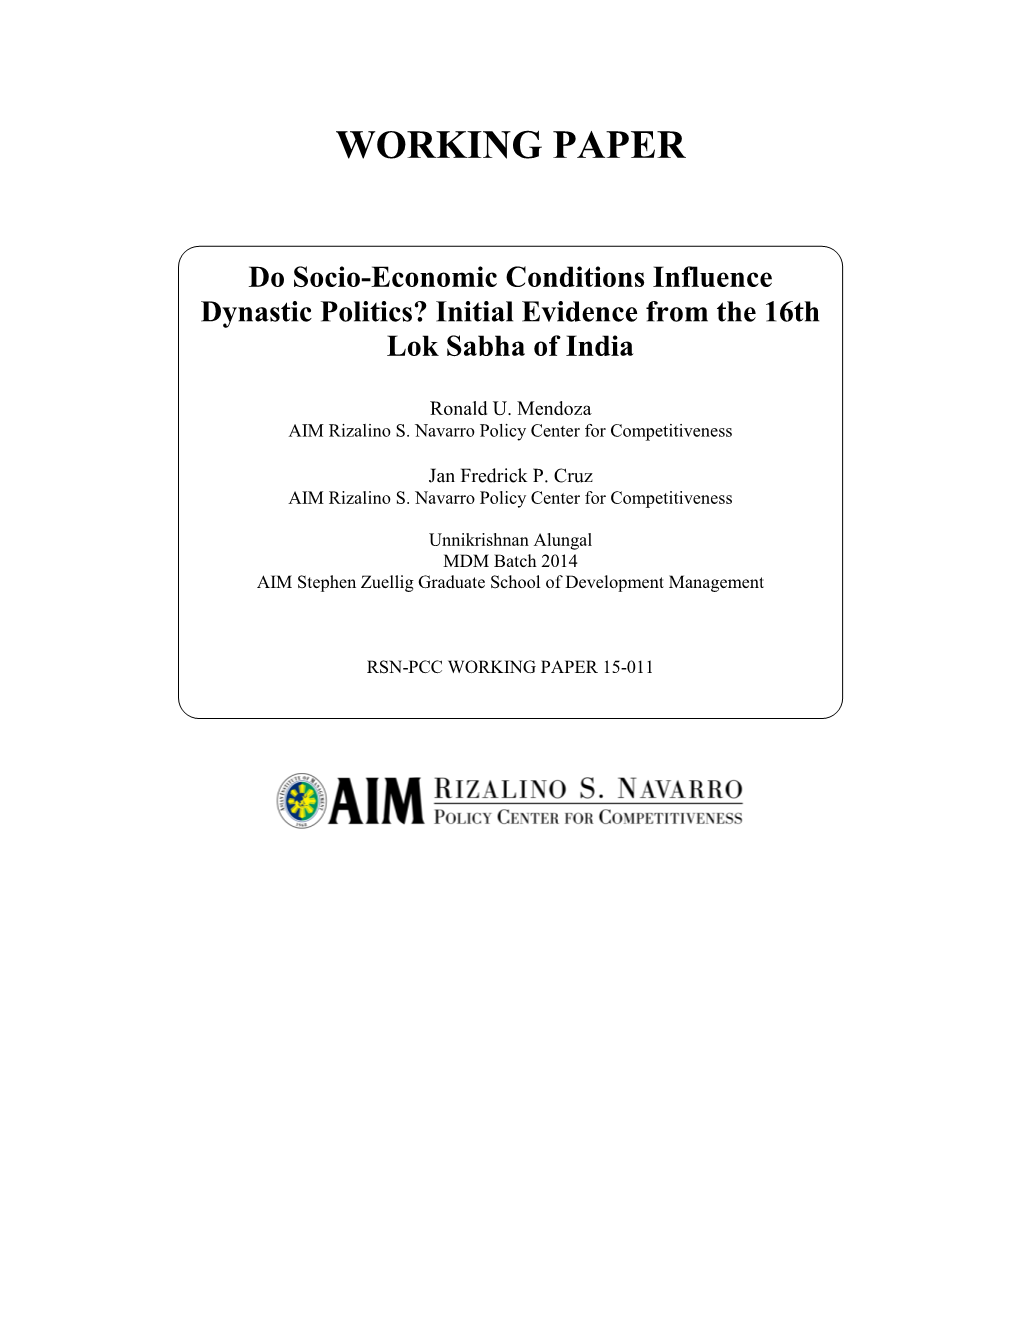 Do Socio-Economic Conditions Influence Dynastic Politics? Initial Evidence from the 16Th Lok Sabha of India